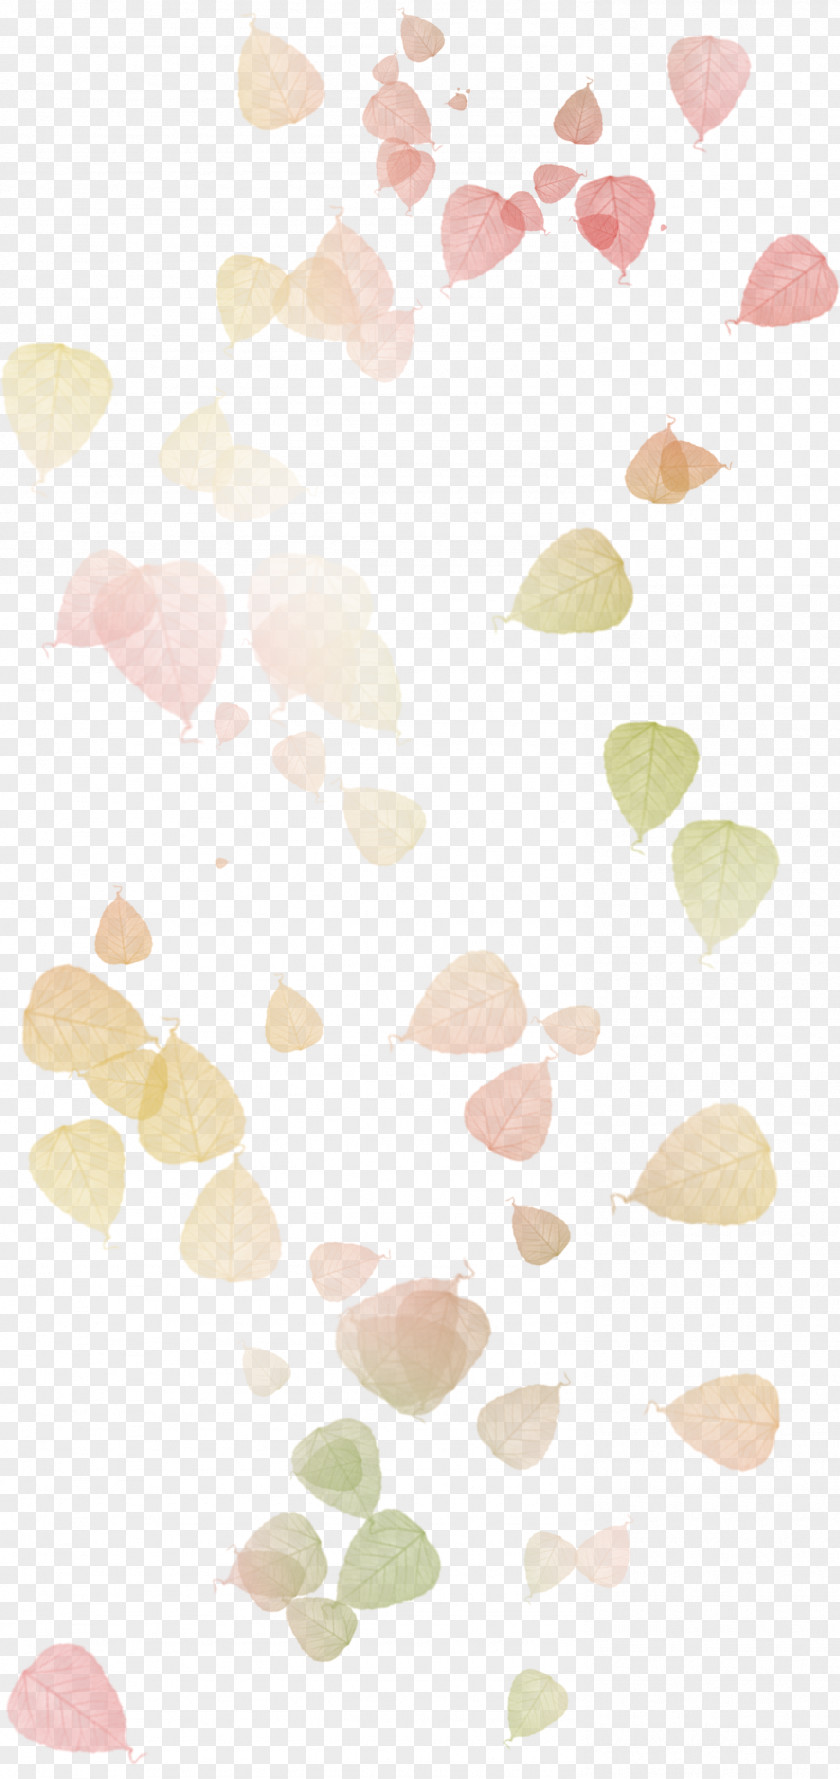 Watercolor Leaves Autumn Leaf Painting PNG